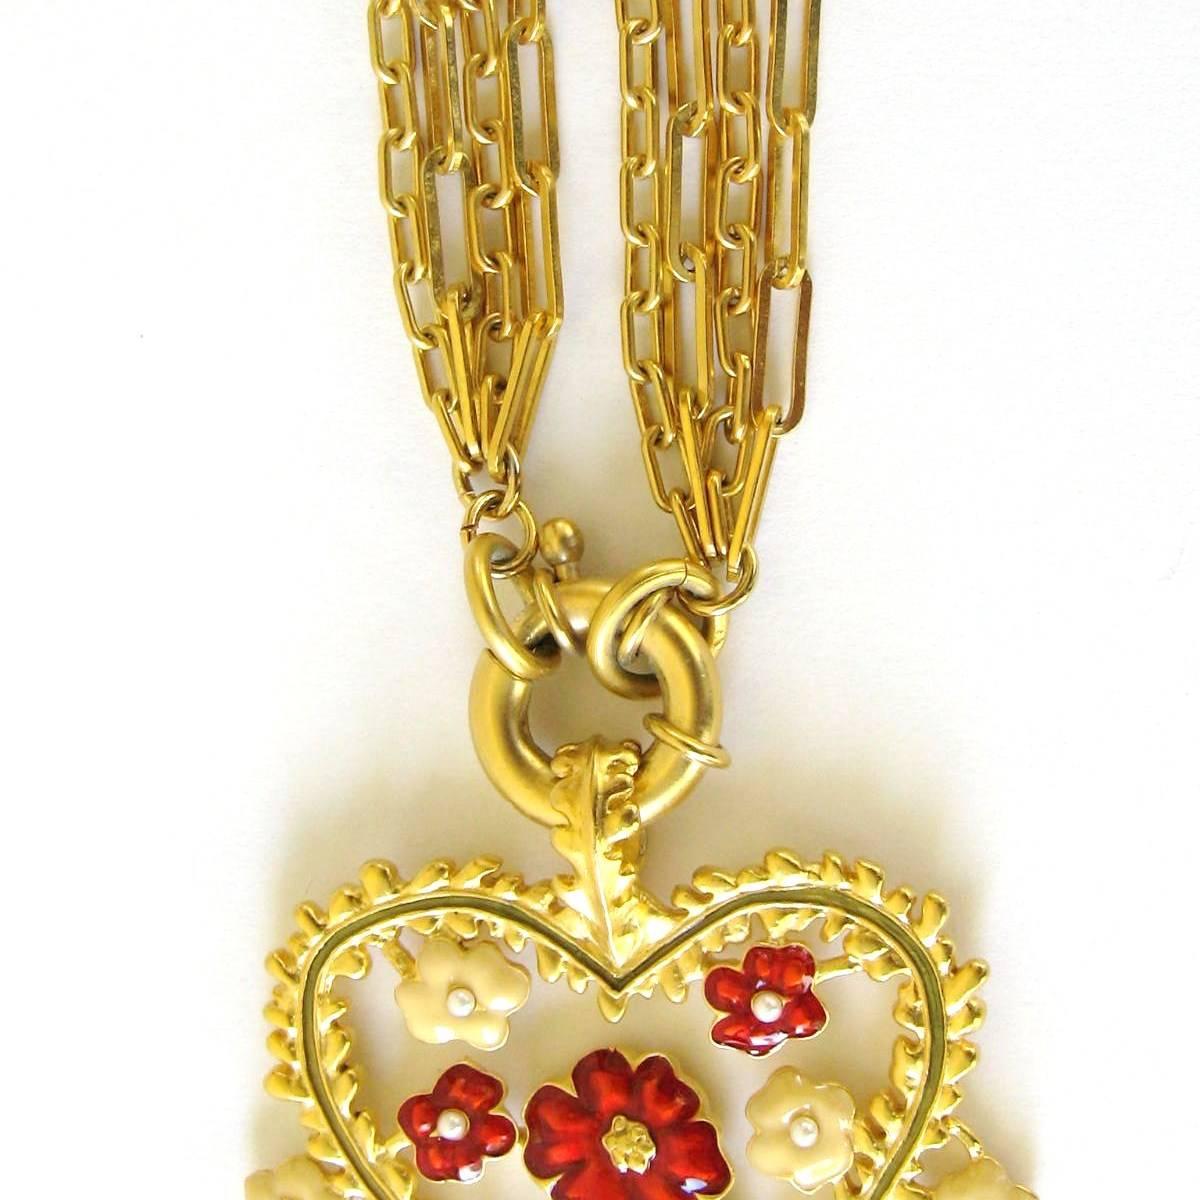 Karl Lagerfeld Red and Tan Enamel New Never worn Heart Necklace 1990s   In New Condition For Sale In Wallkill, NY